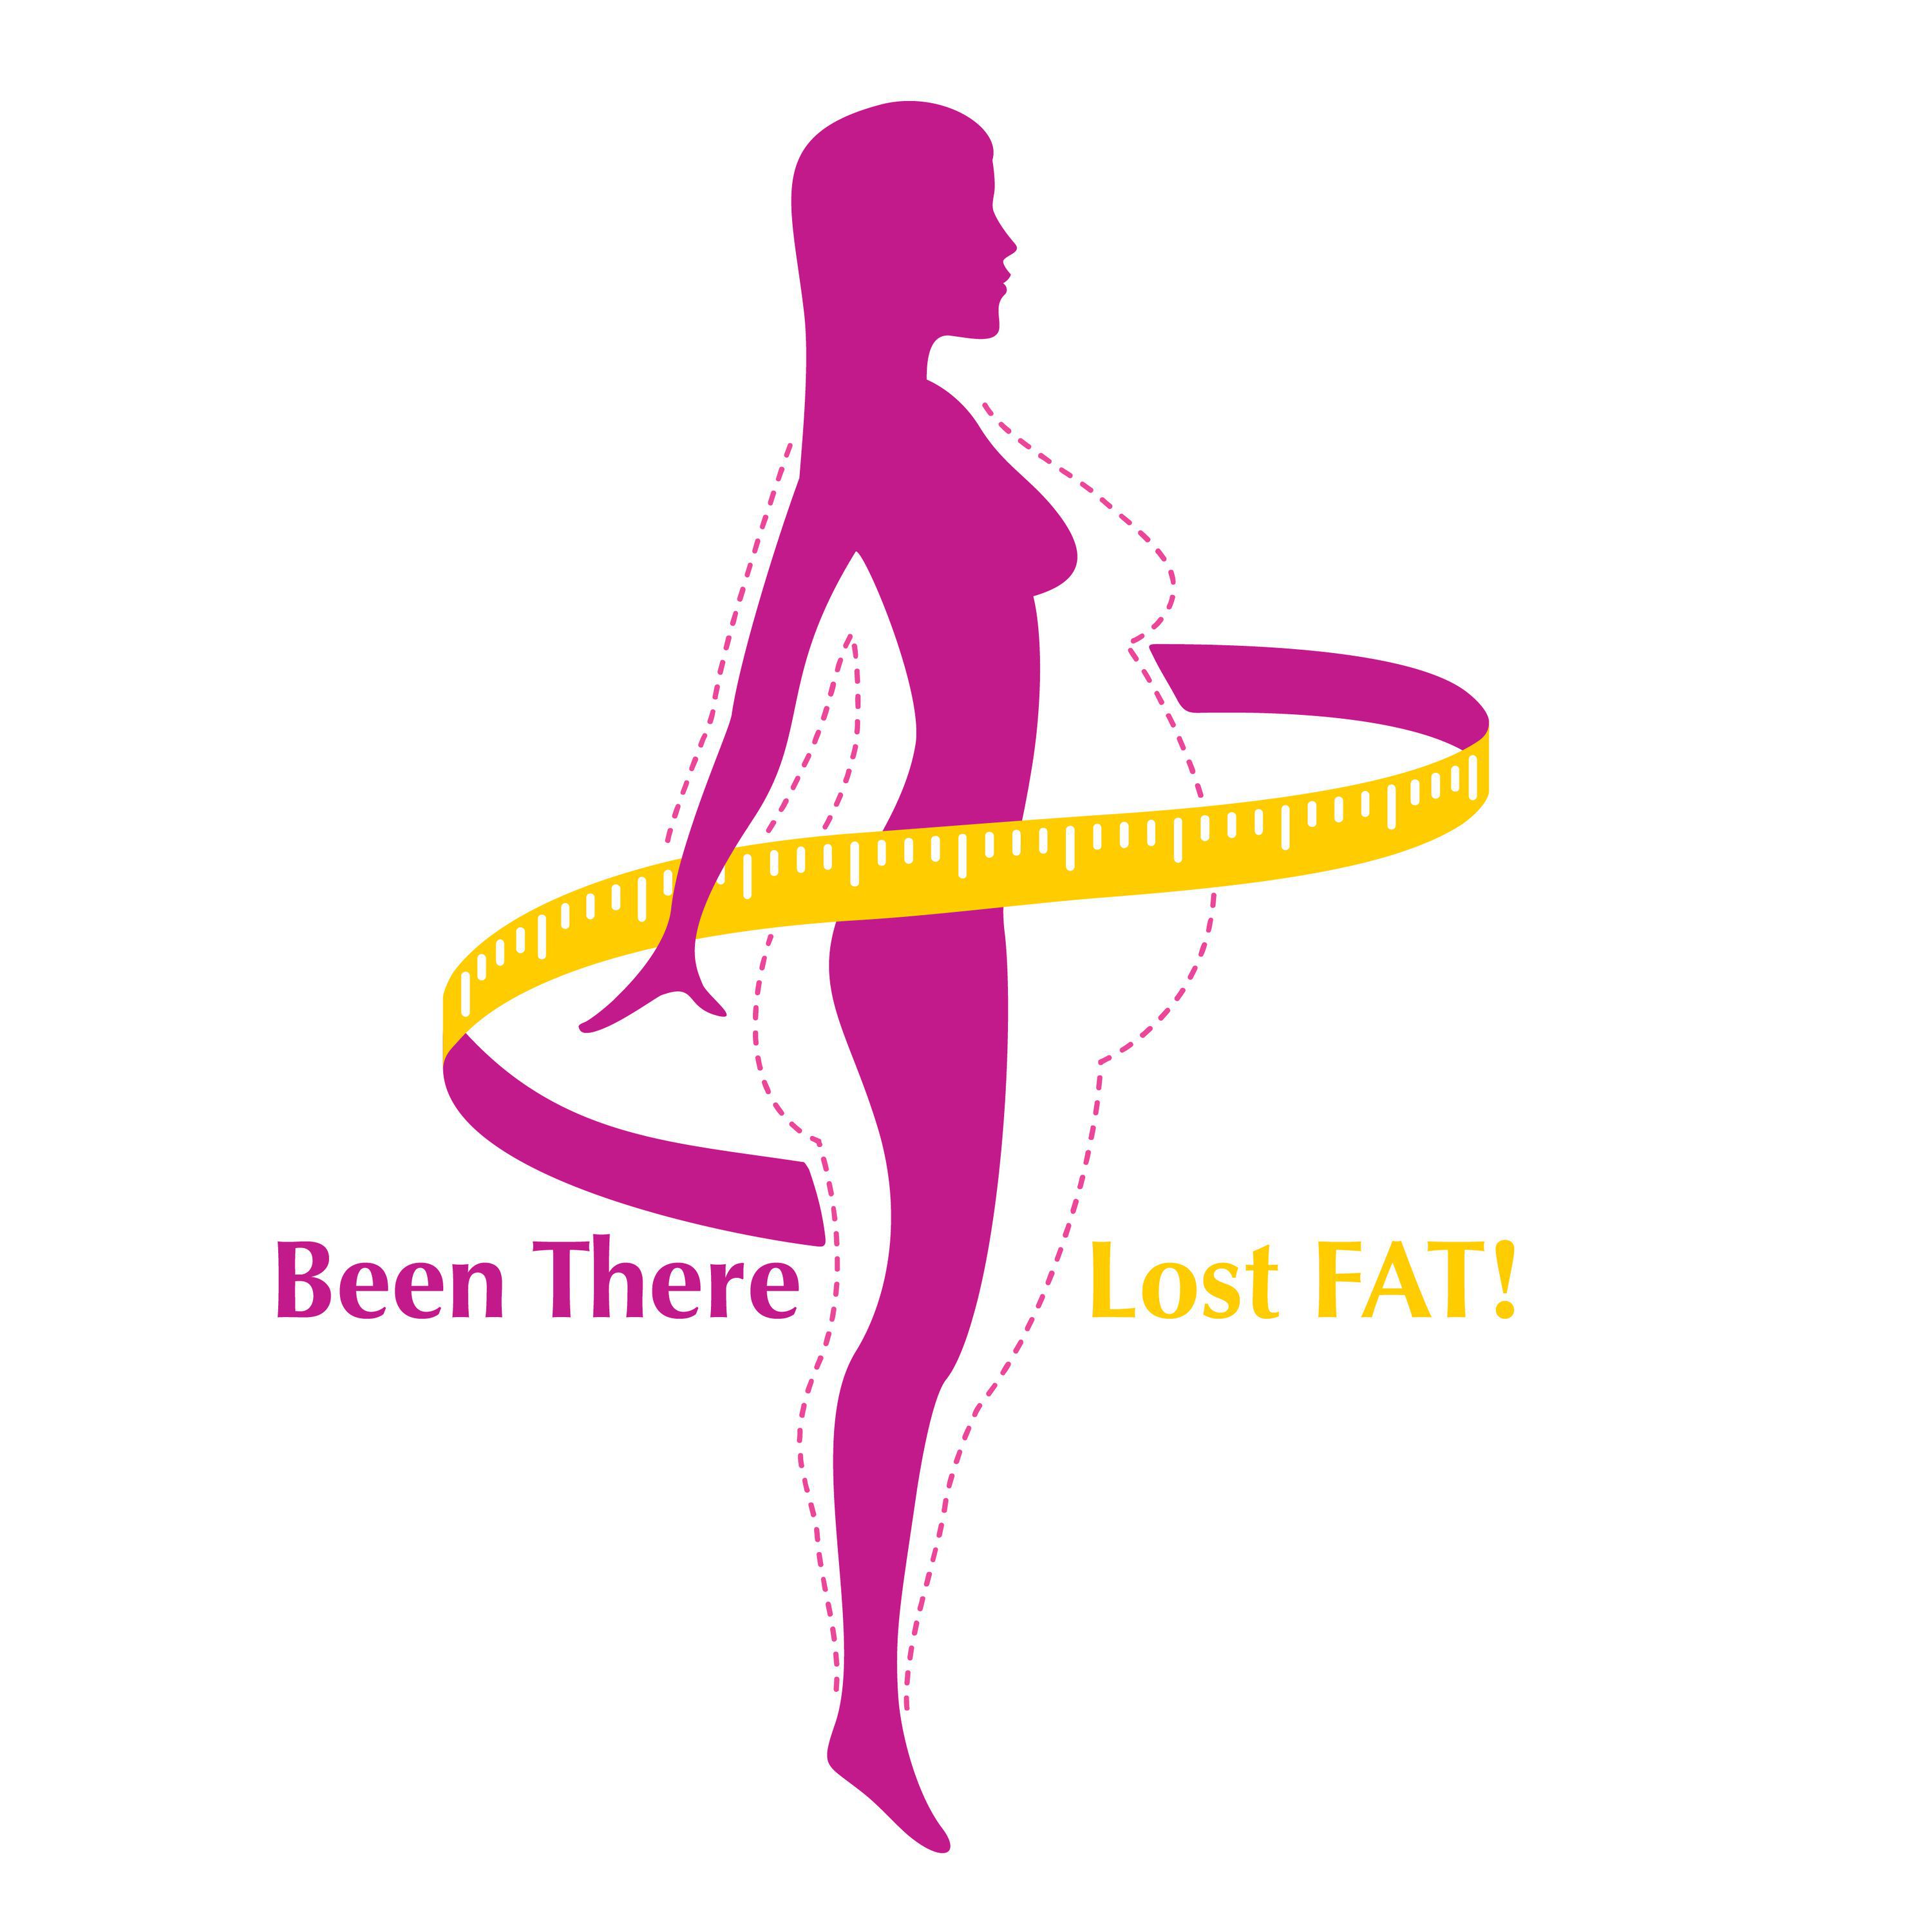 Been there, lost fat!